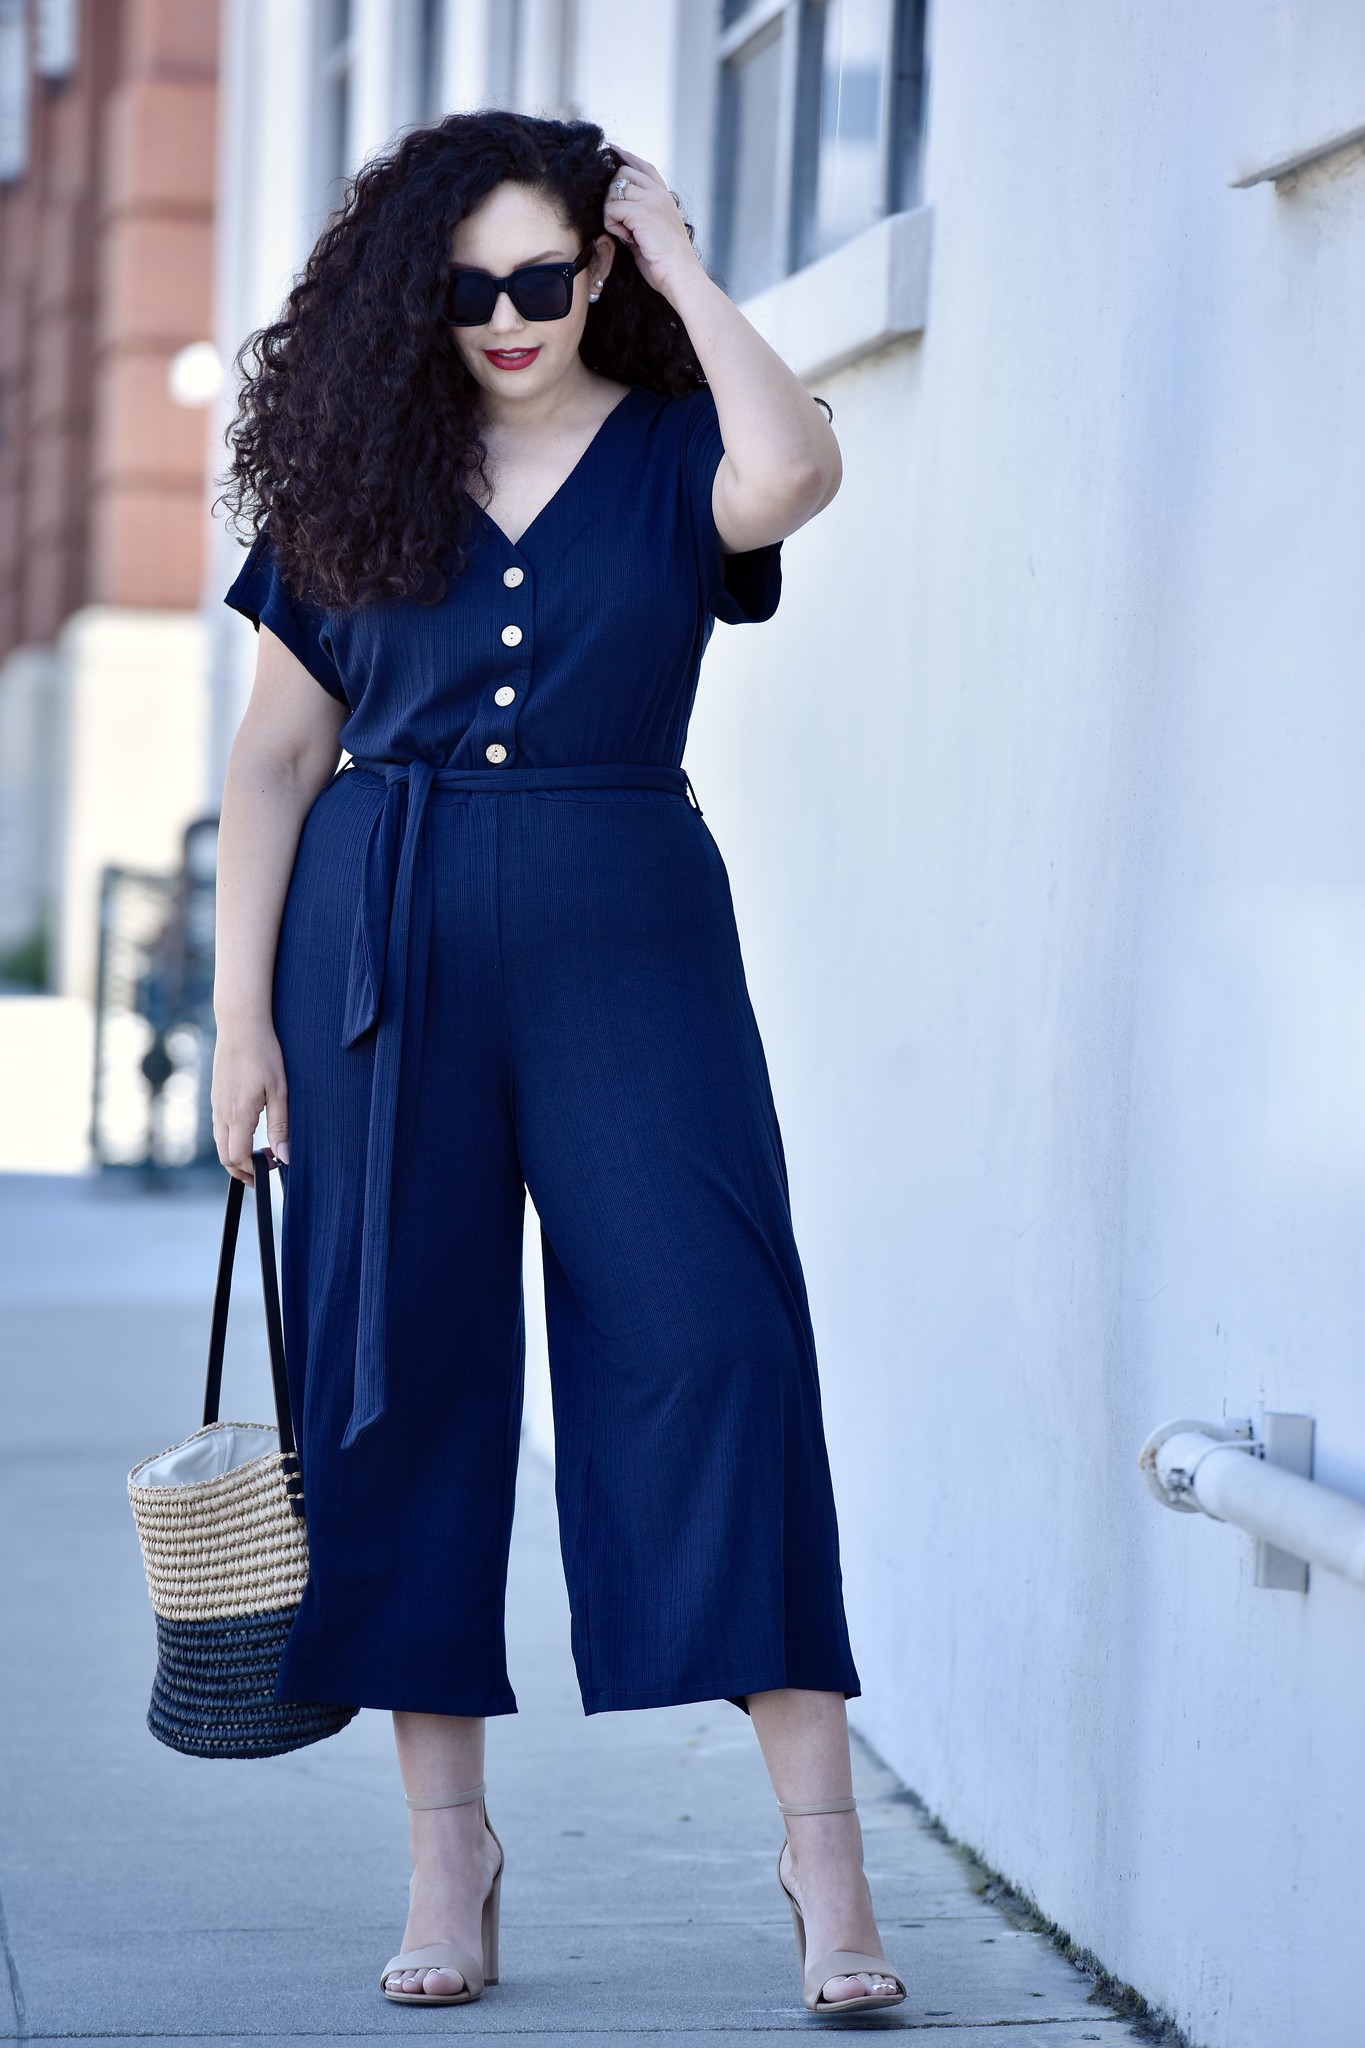 This Is What I Can't Stop Wearing Via @GirlWithCurves #jumpsuit #fashion #style #summer #spring #violeta #nars #celine